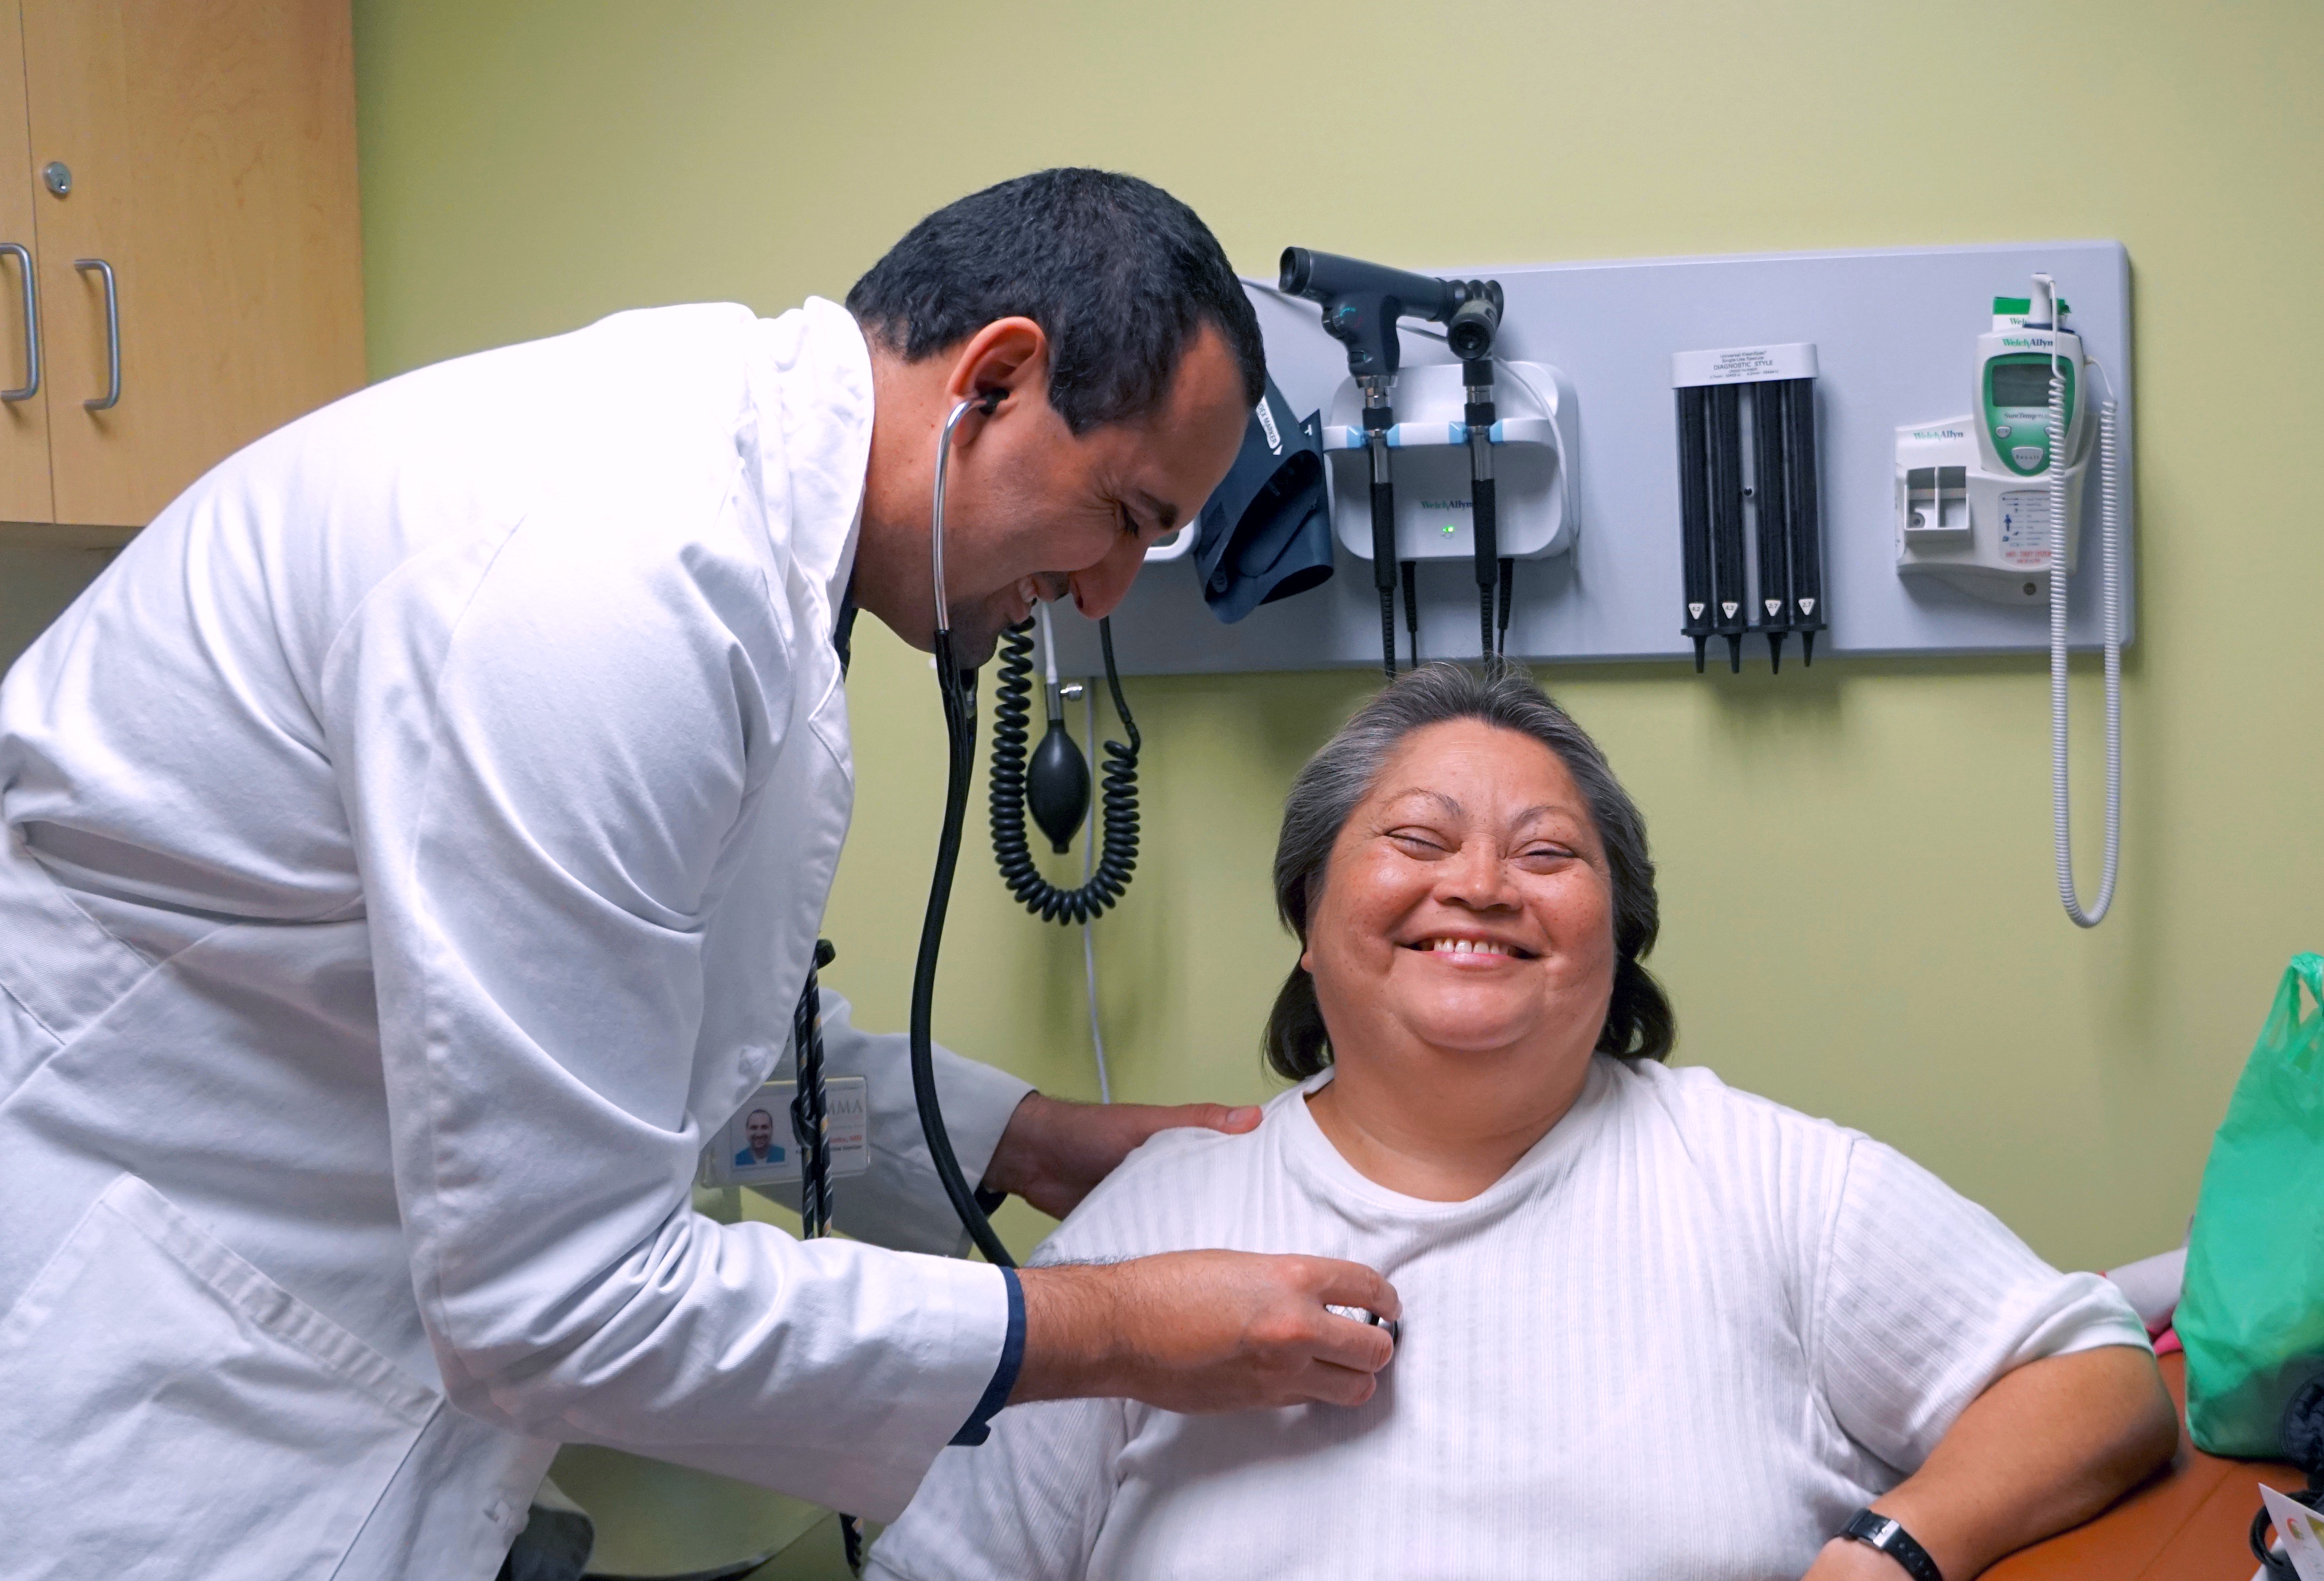 Pictured: Dr. Cesar Barba cares for a long-time UMMA patient at the Fremont Wellness Center